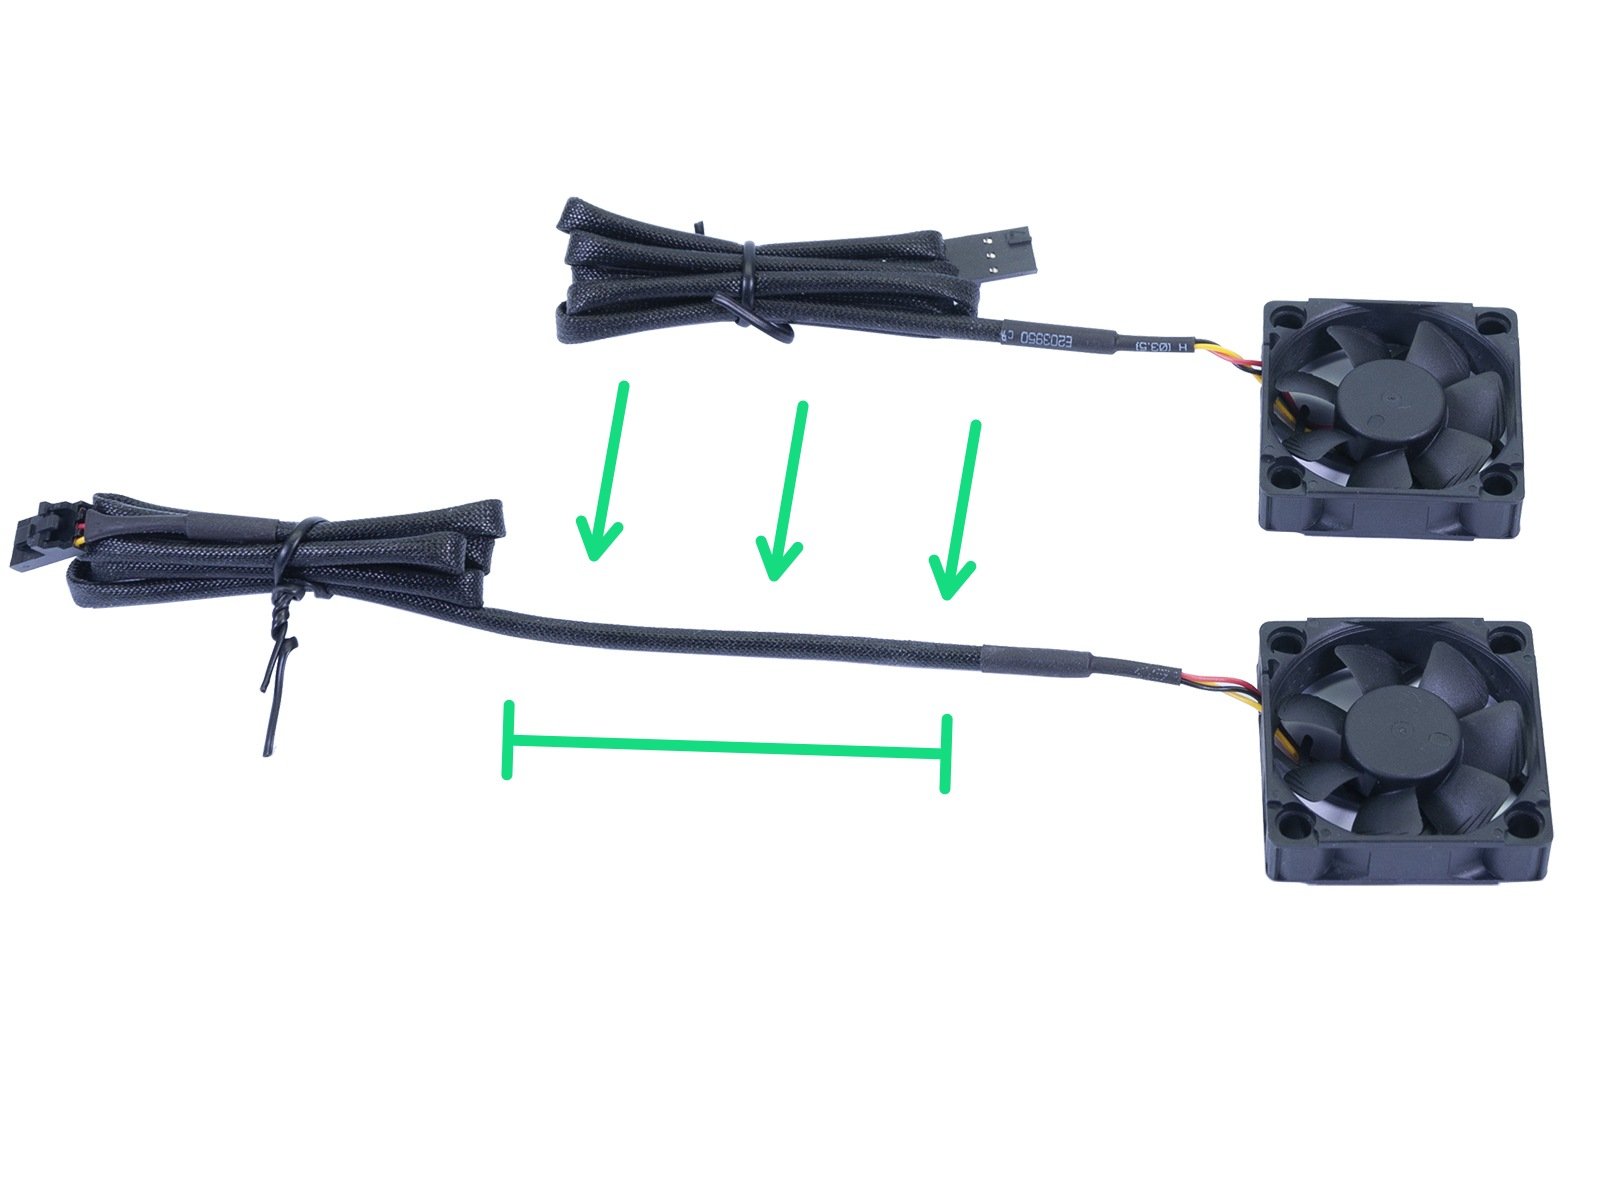 Hotend fan cable adjustment